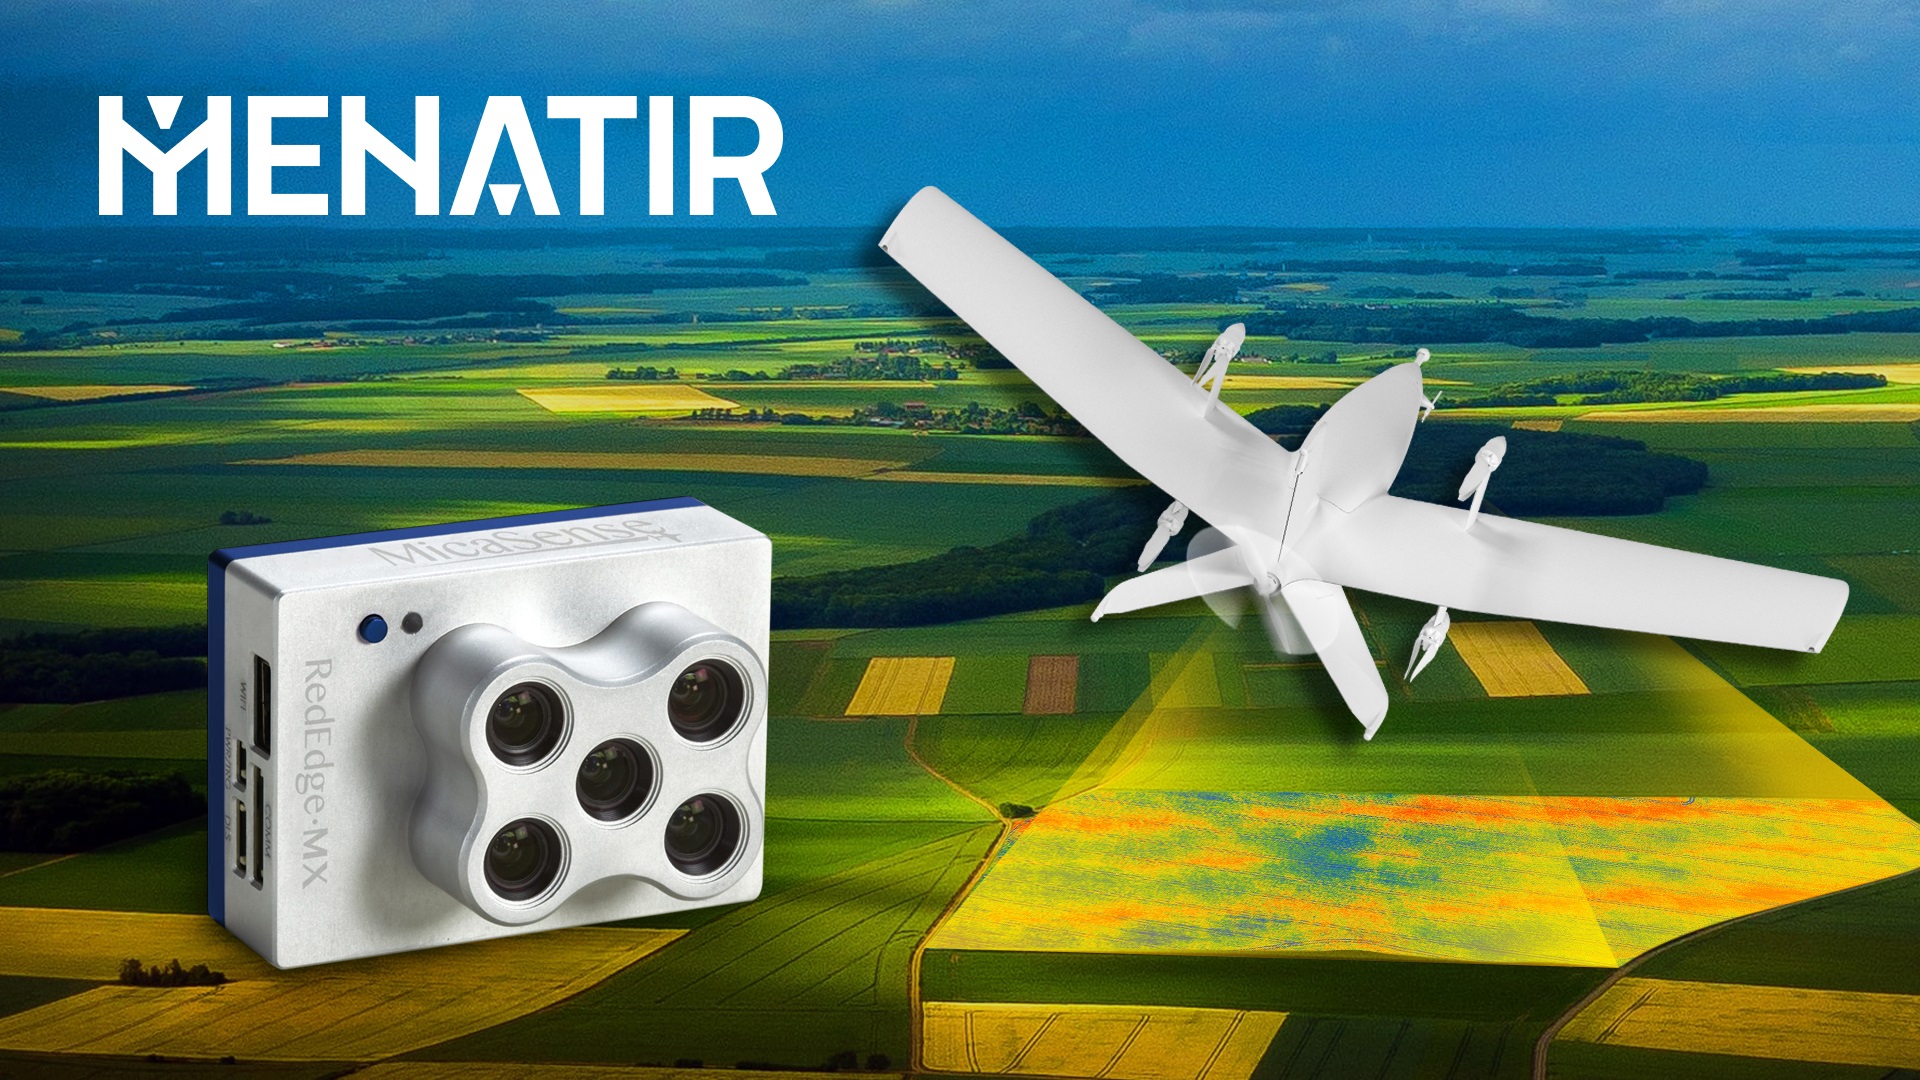 Multispectral mapping with MENATIR: what is the advantage compared to standard UAVs